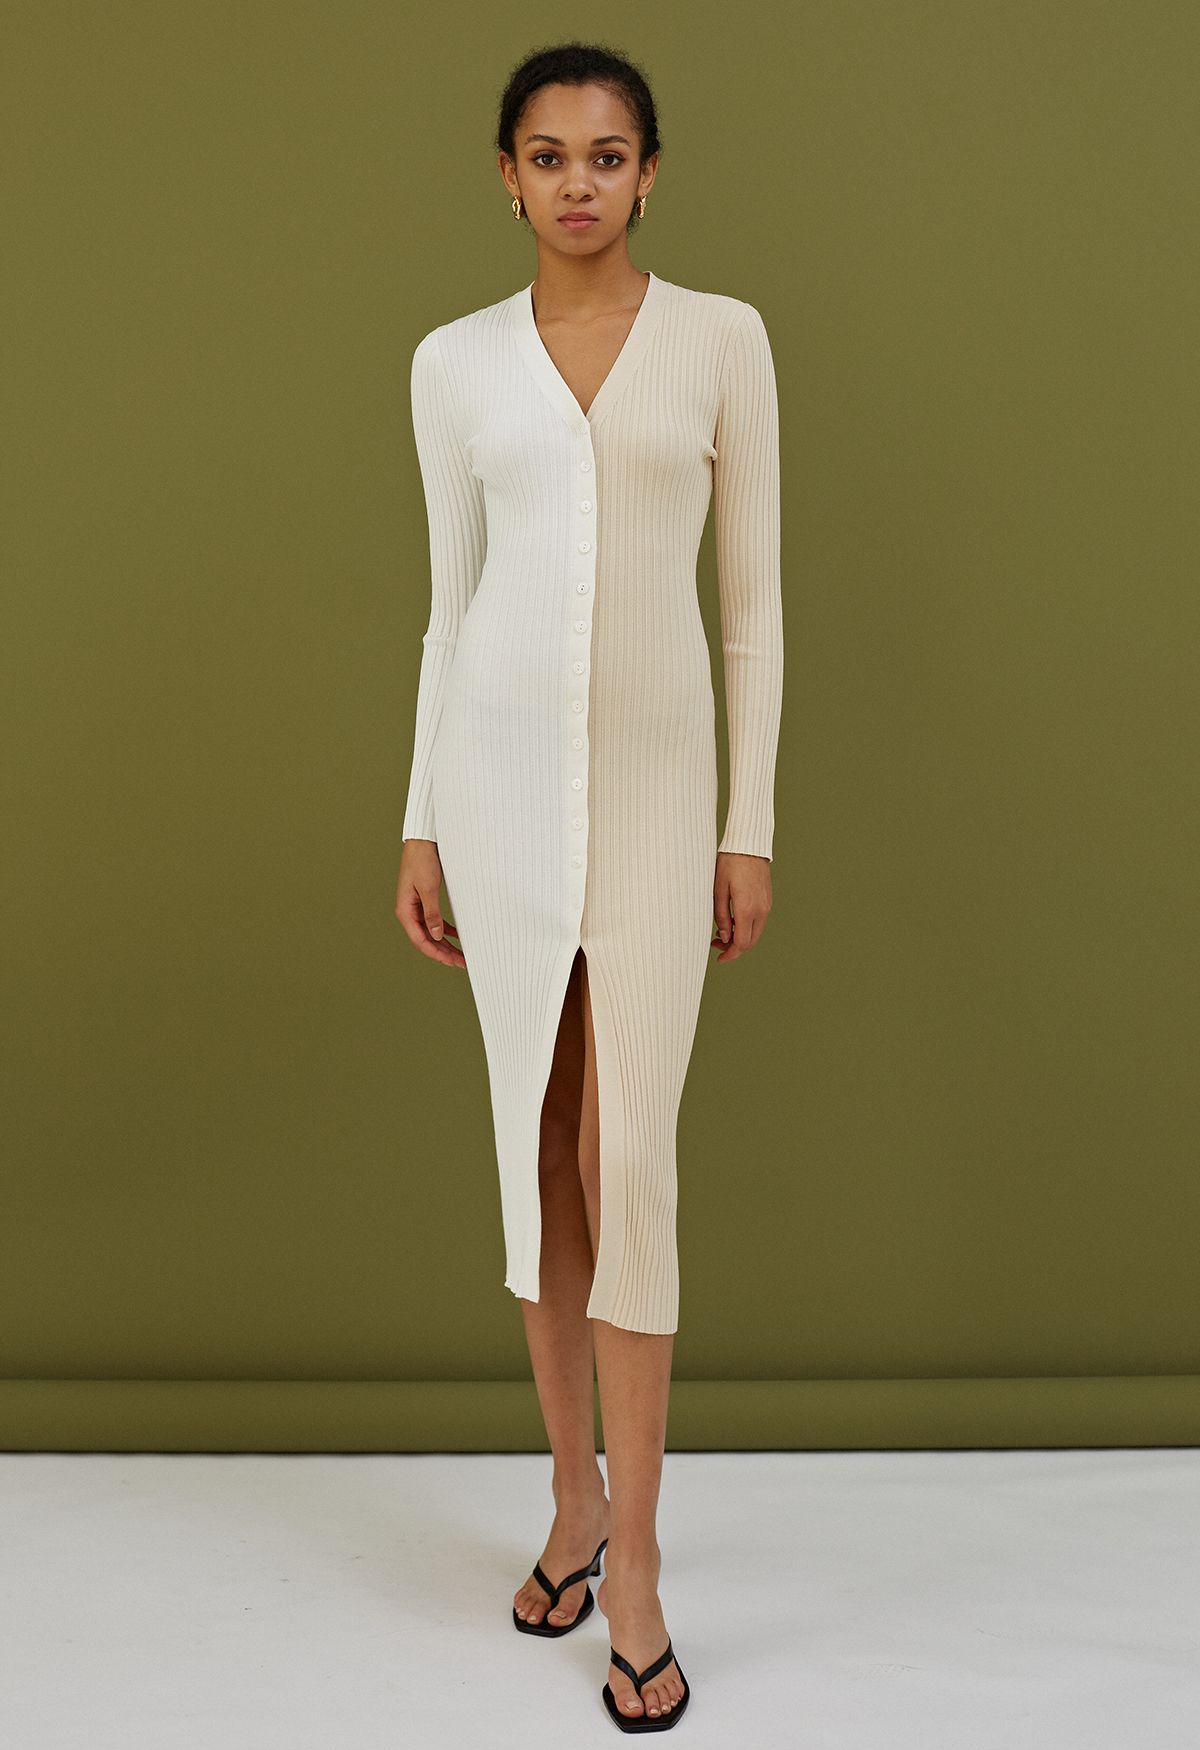 Front Slit Bodycon Knit Dress in White - Retro, Indie and Unique Fashion